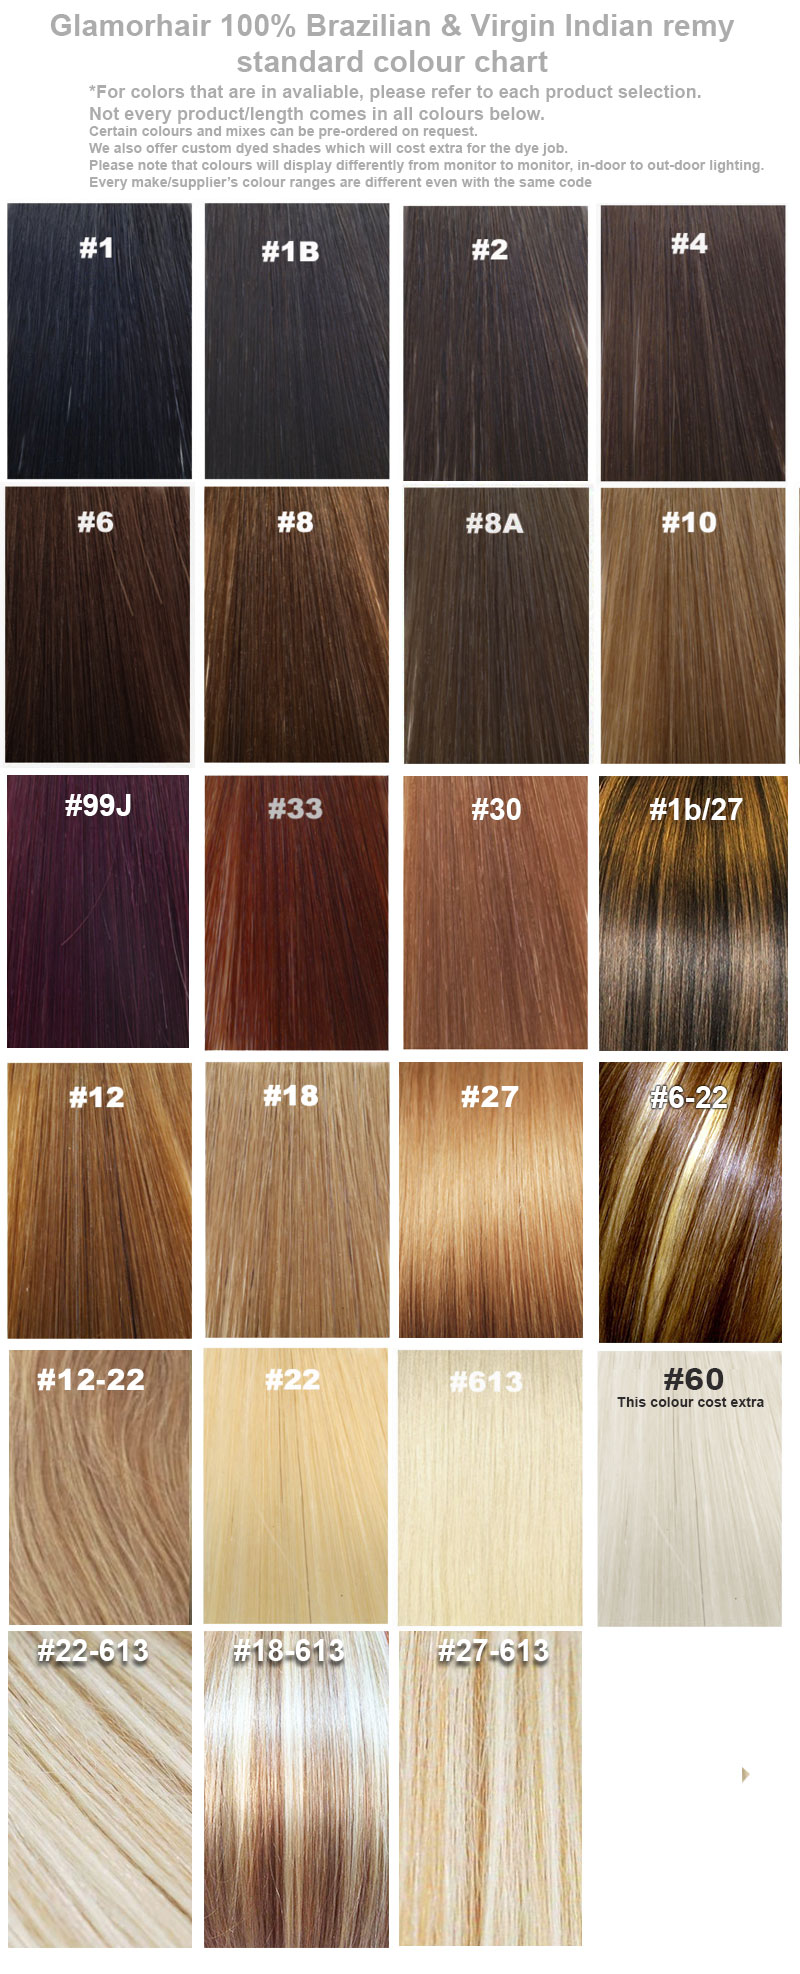 Glamorhair color chart